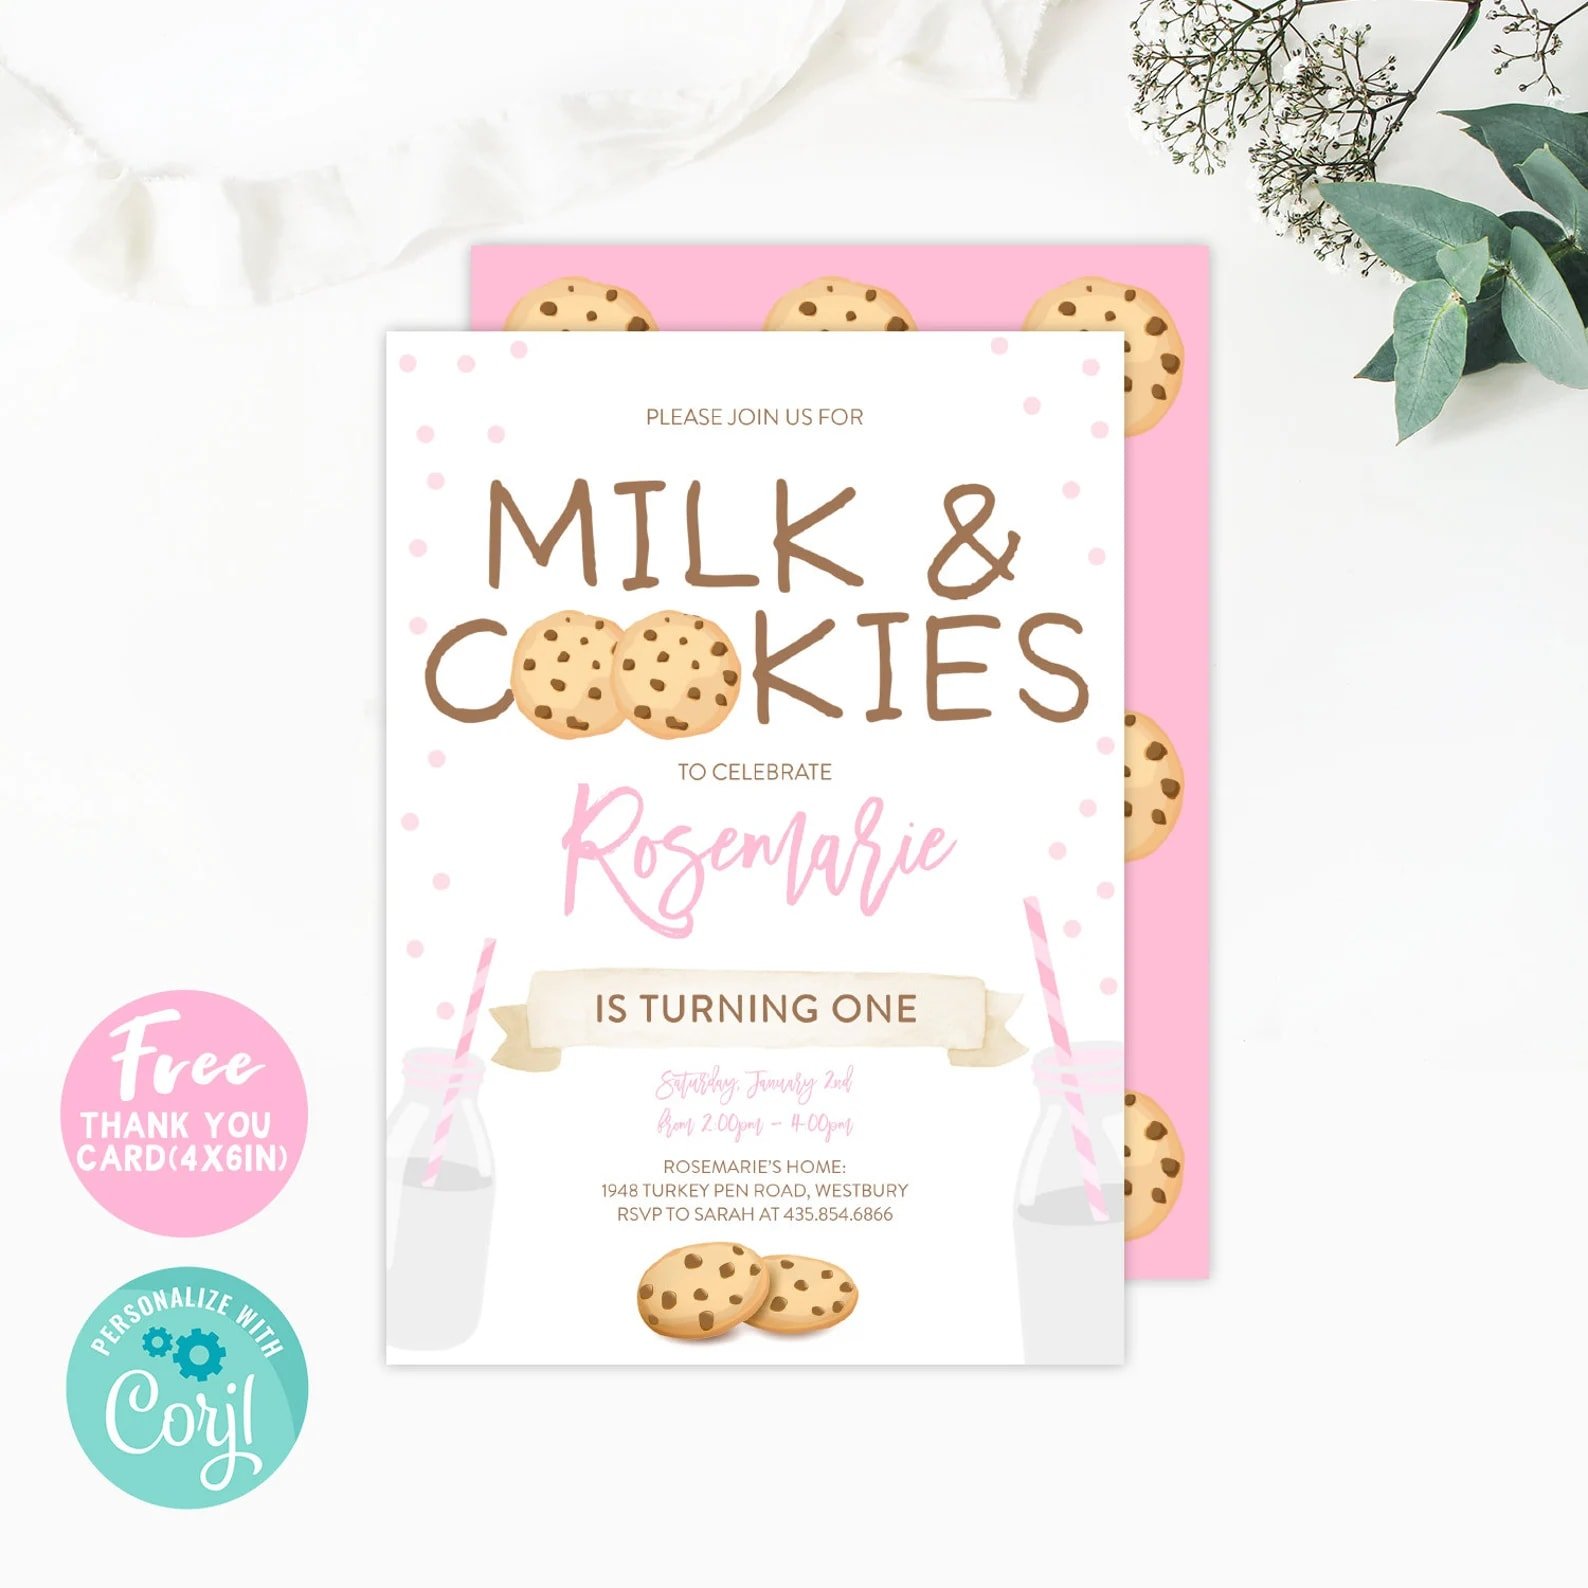 Cookies and milk party invitation 